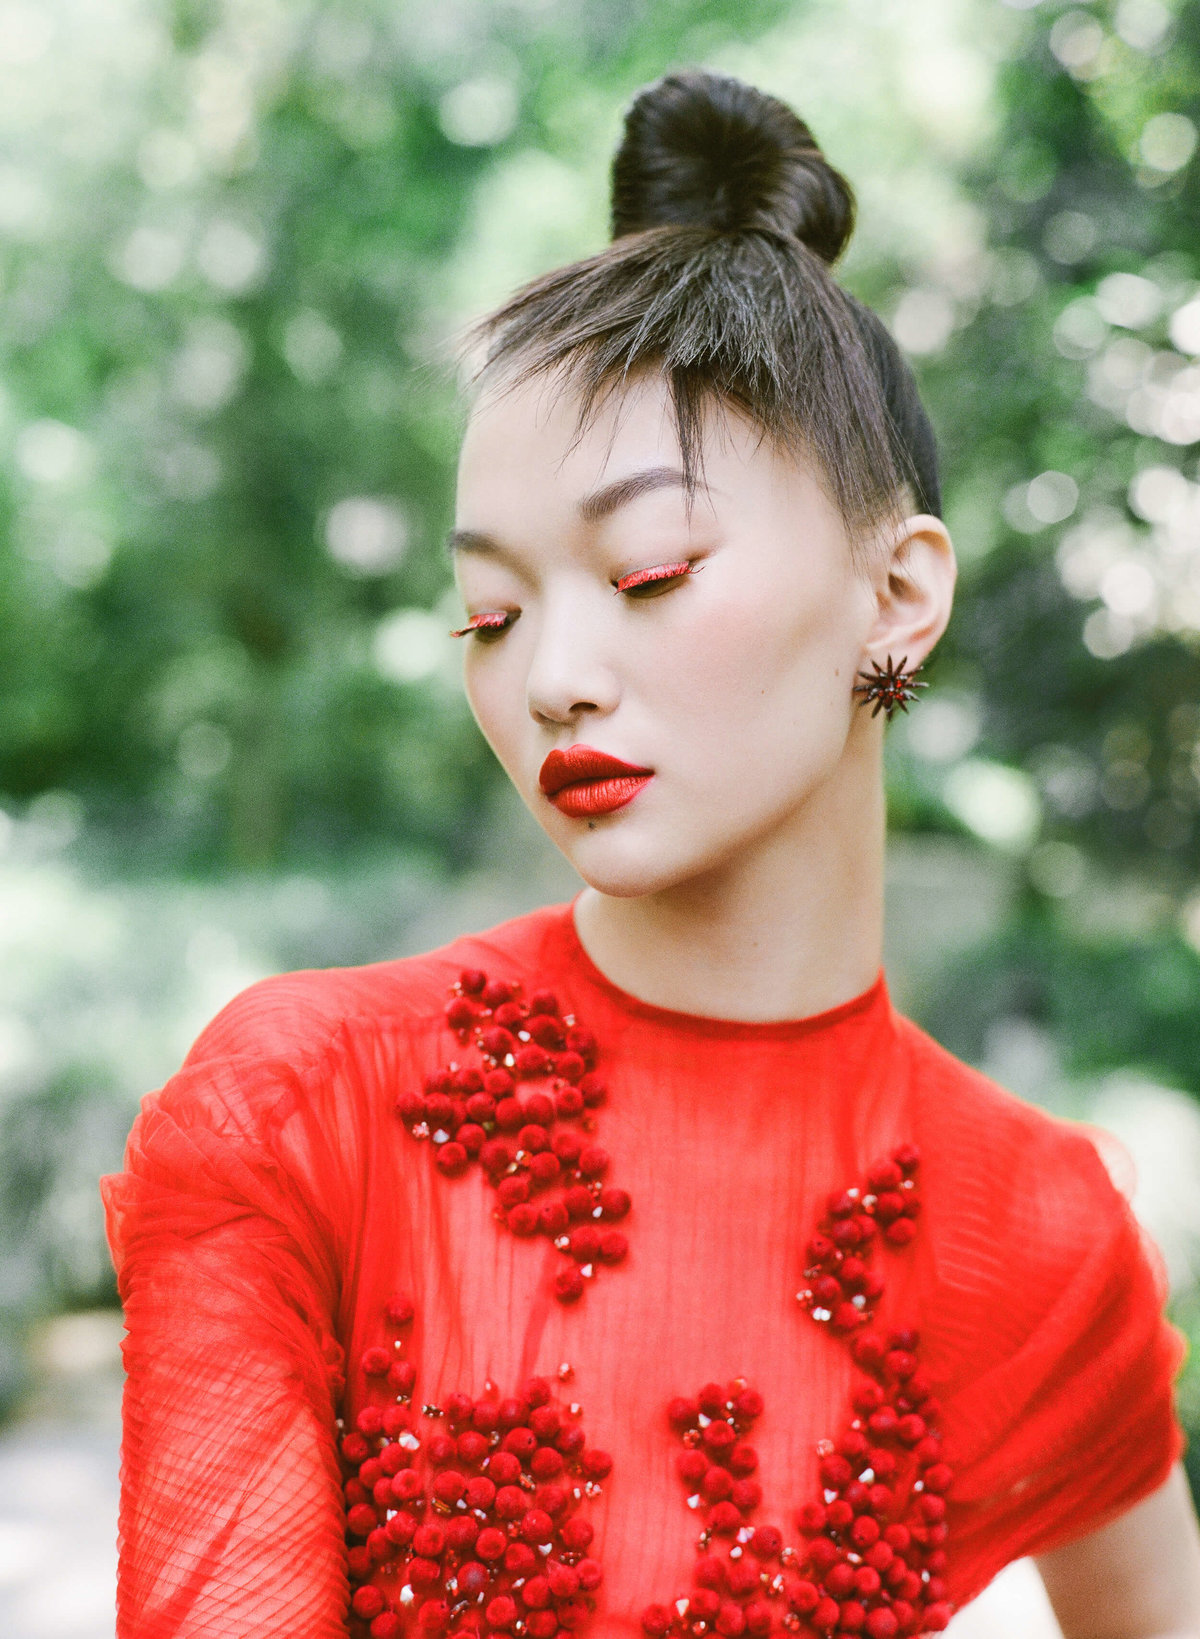 5-KTMerry-Harpers-Bazaar-Phuong-My-haute-couture